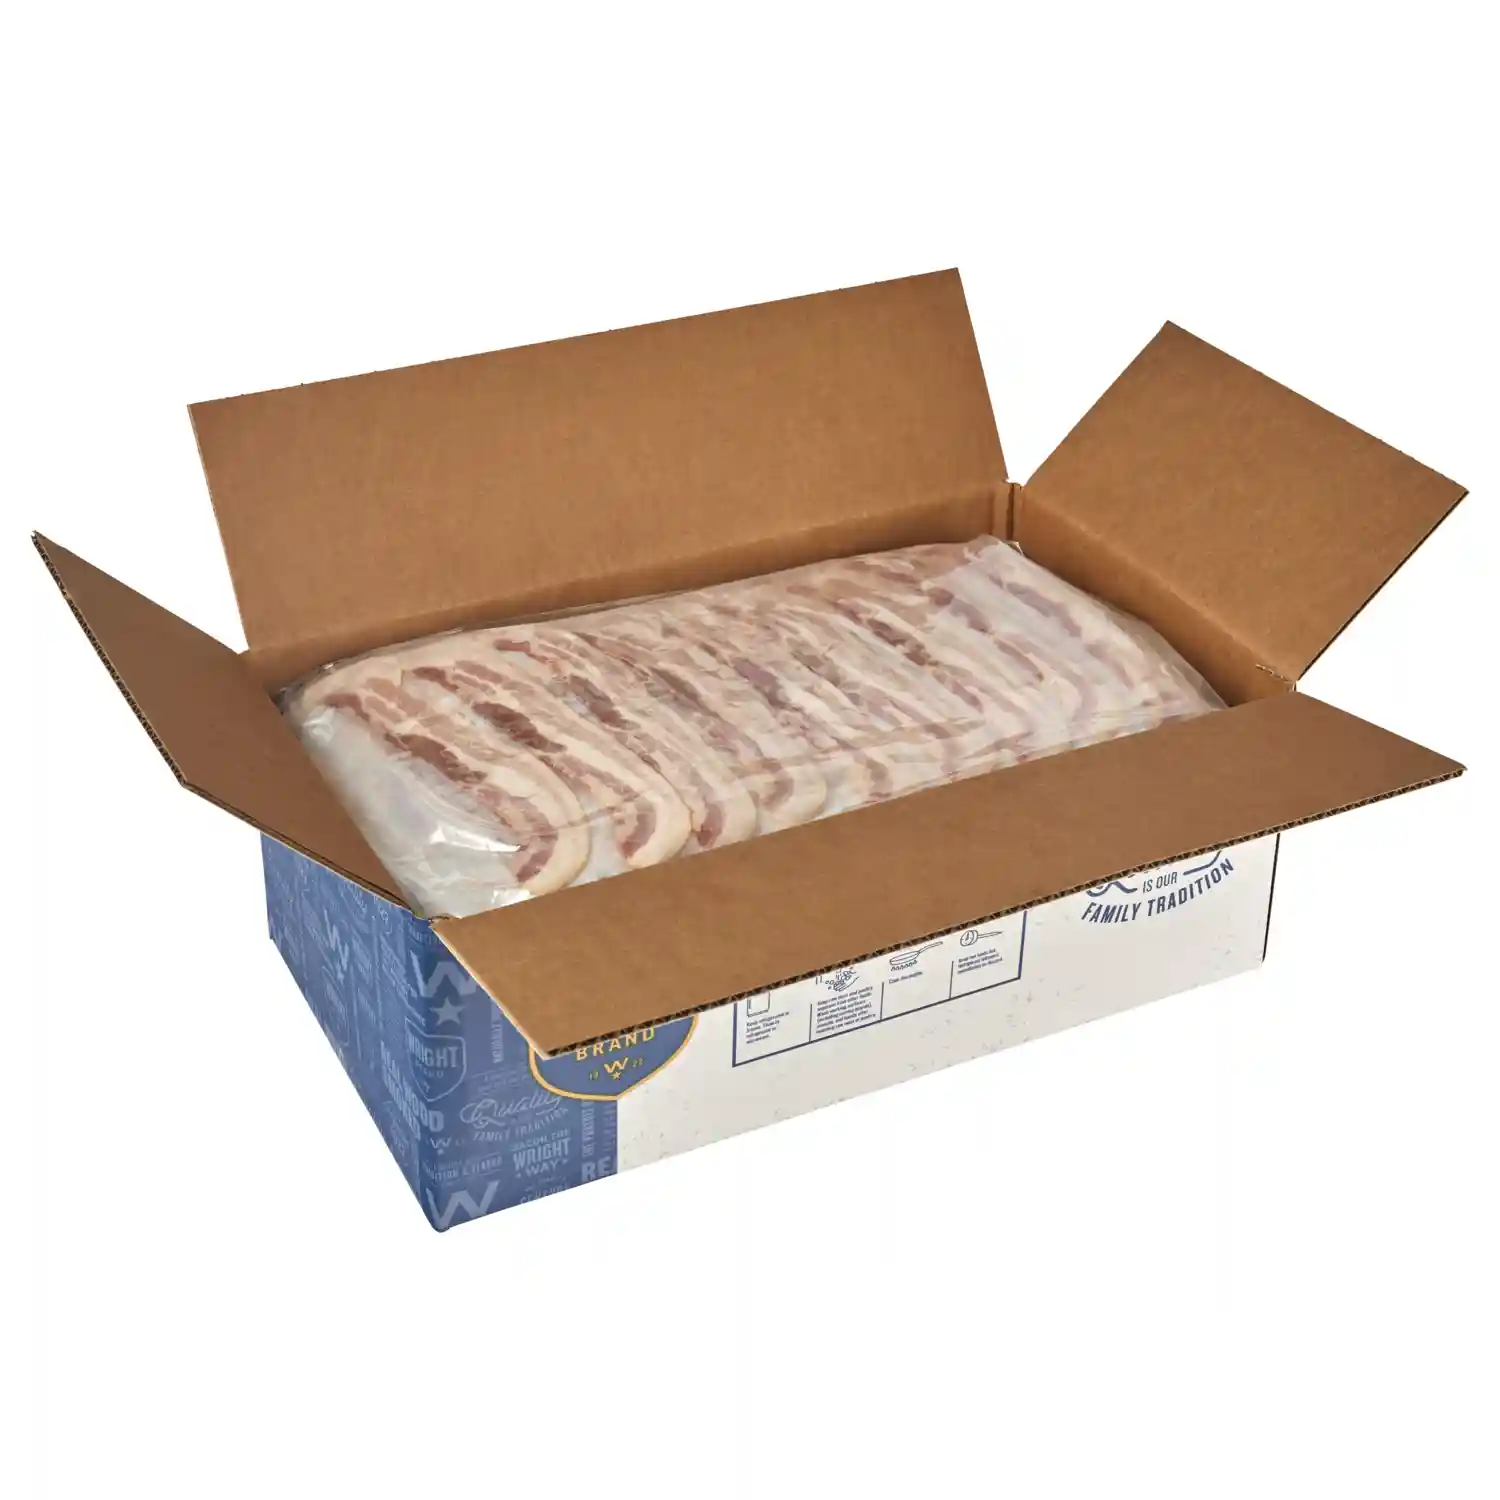 Wright® Brand Naturally Applewood Smoked Regular Sliced Bacon, Flat-Pack®, 15 Lbs, 14-18 Slices per Pound, Gas Flushed_image_41